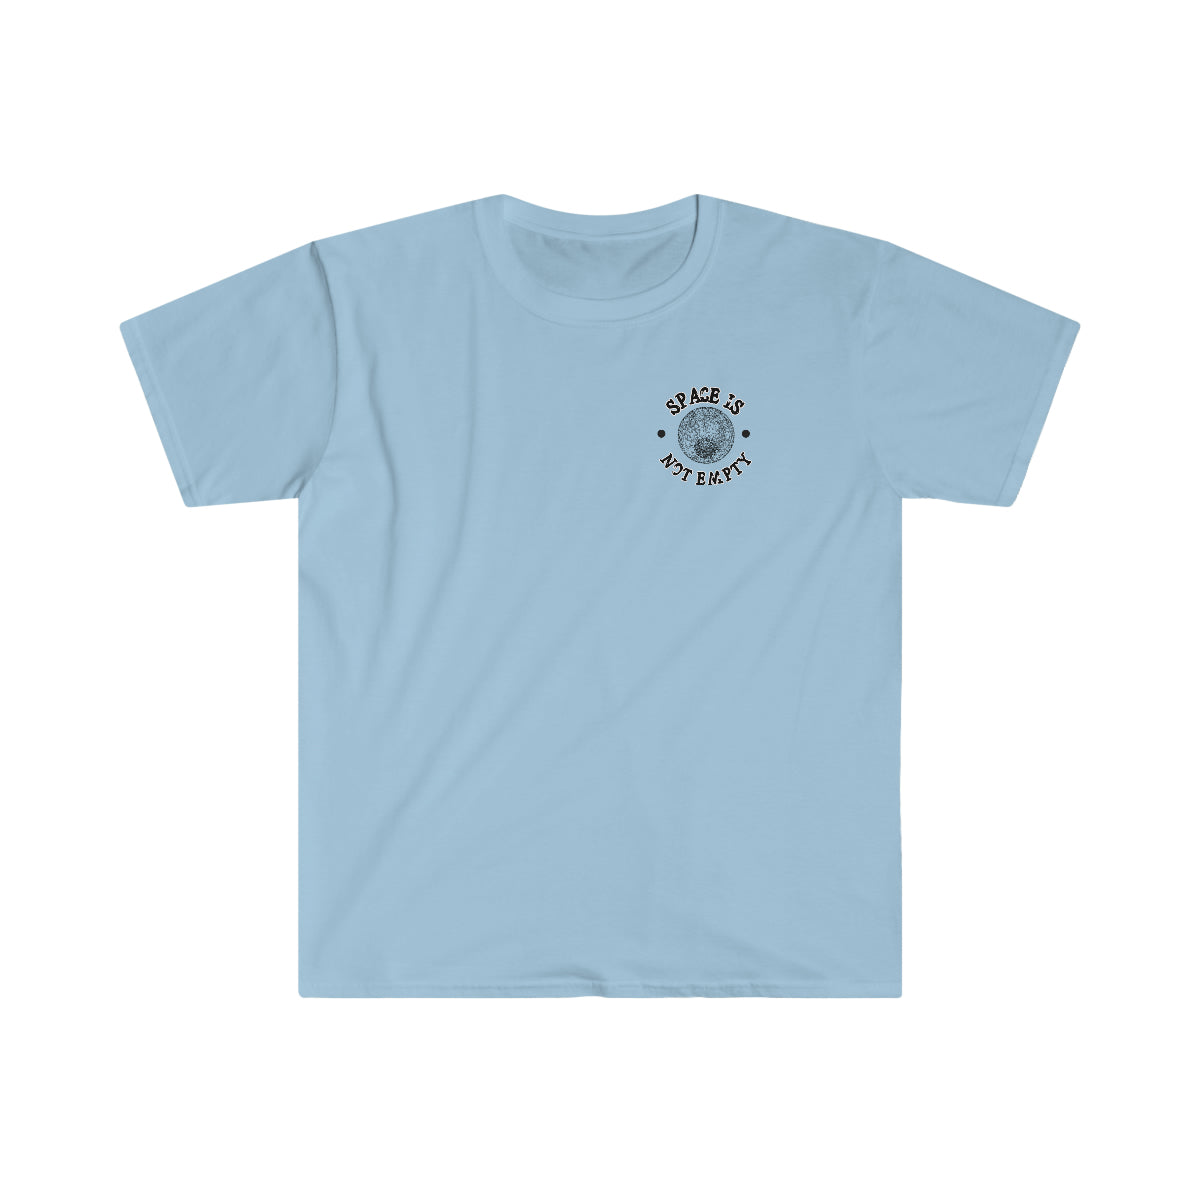 A Deep Space Station light blue t-shirt with a circle on it from the One Tee Project.